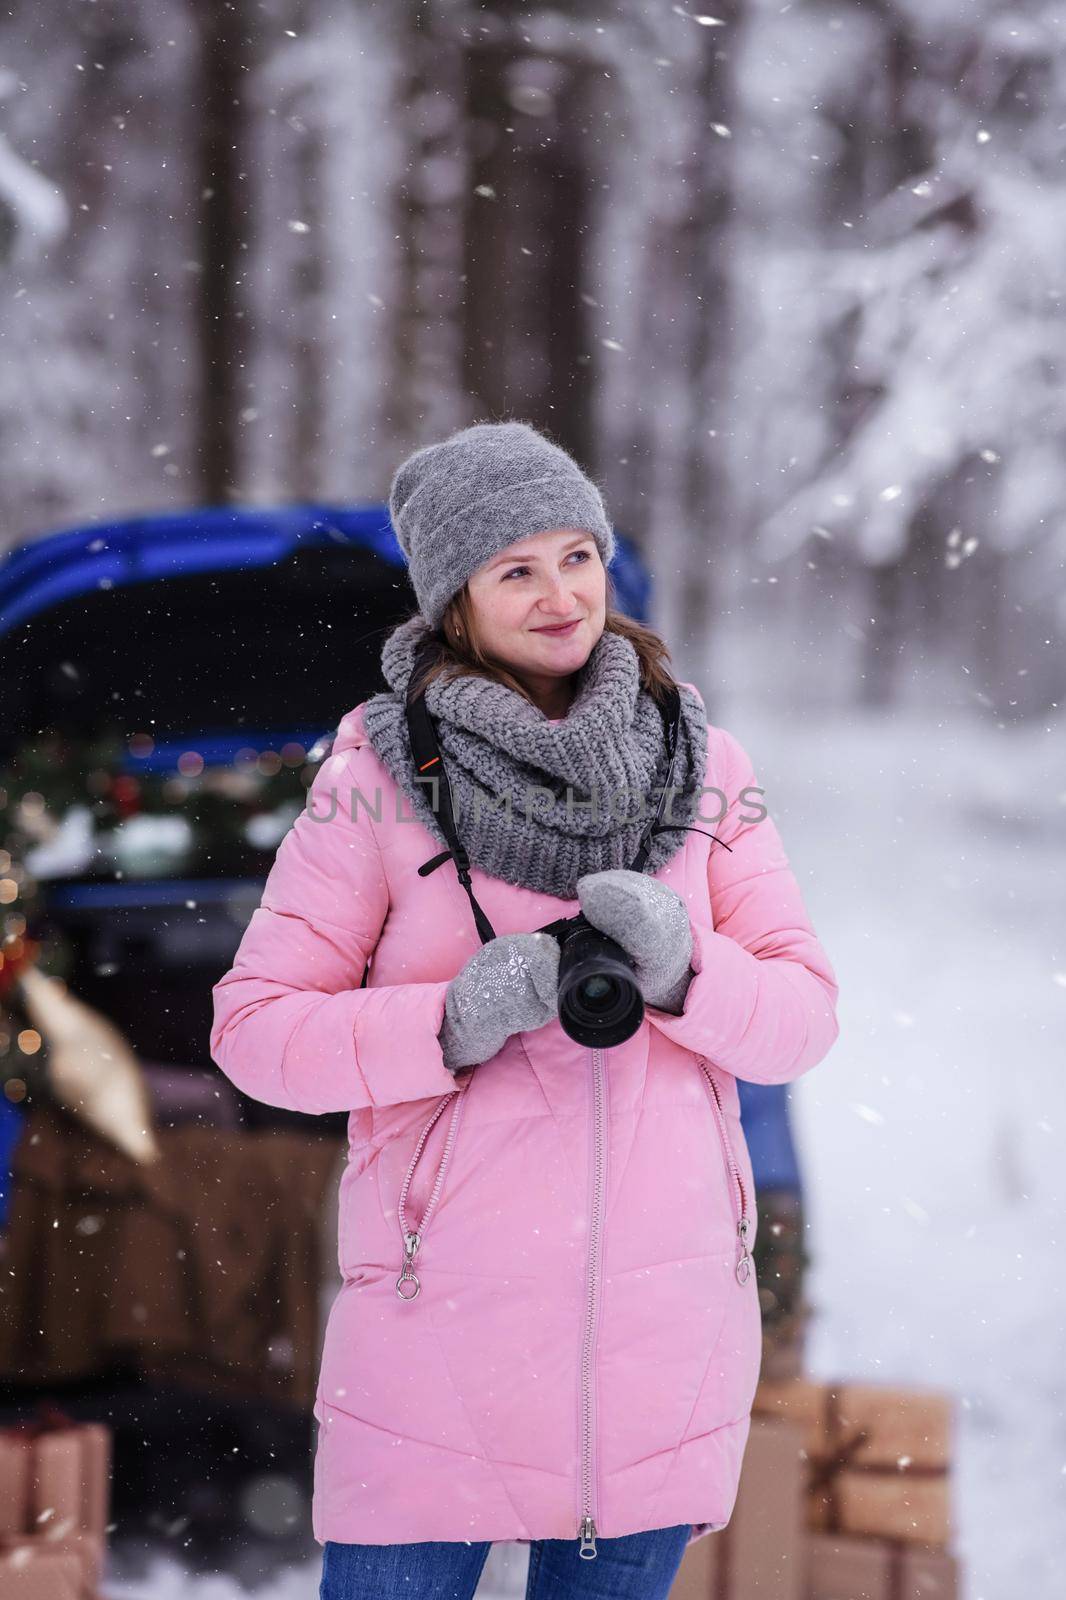 A woman in a winter snow-covered forest in the trunk of a car decorated with Christmas decor. A female photographer holds a camera in her hands.